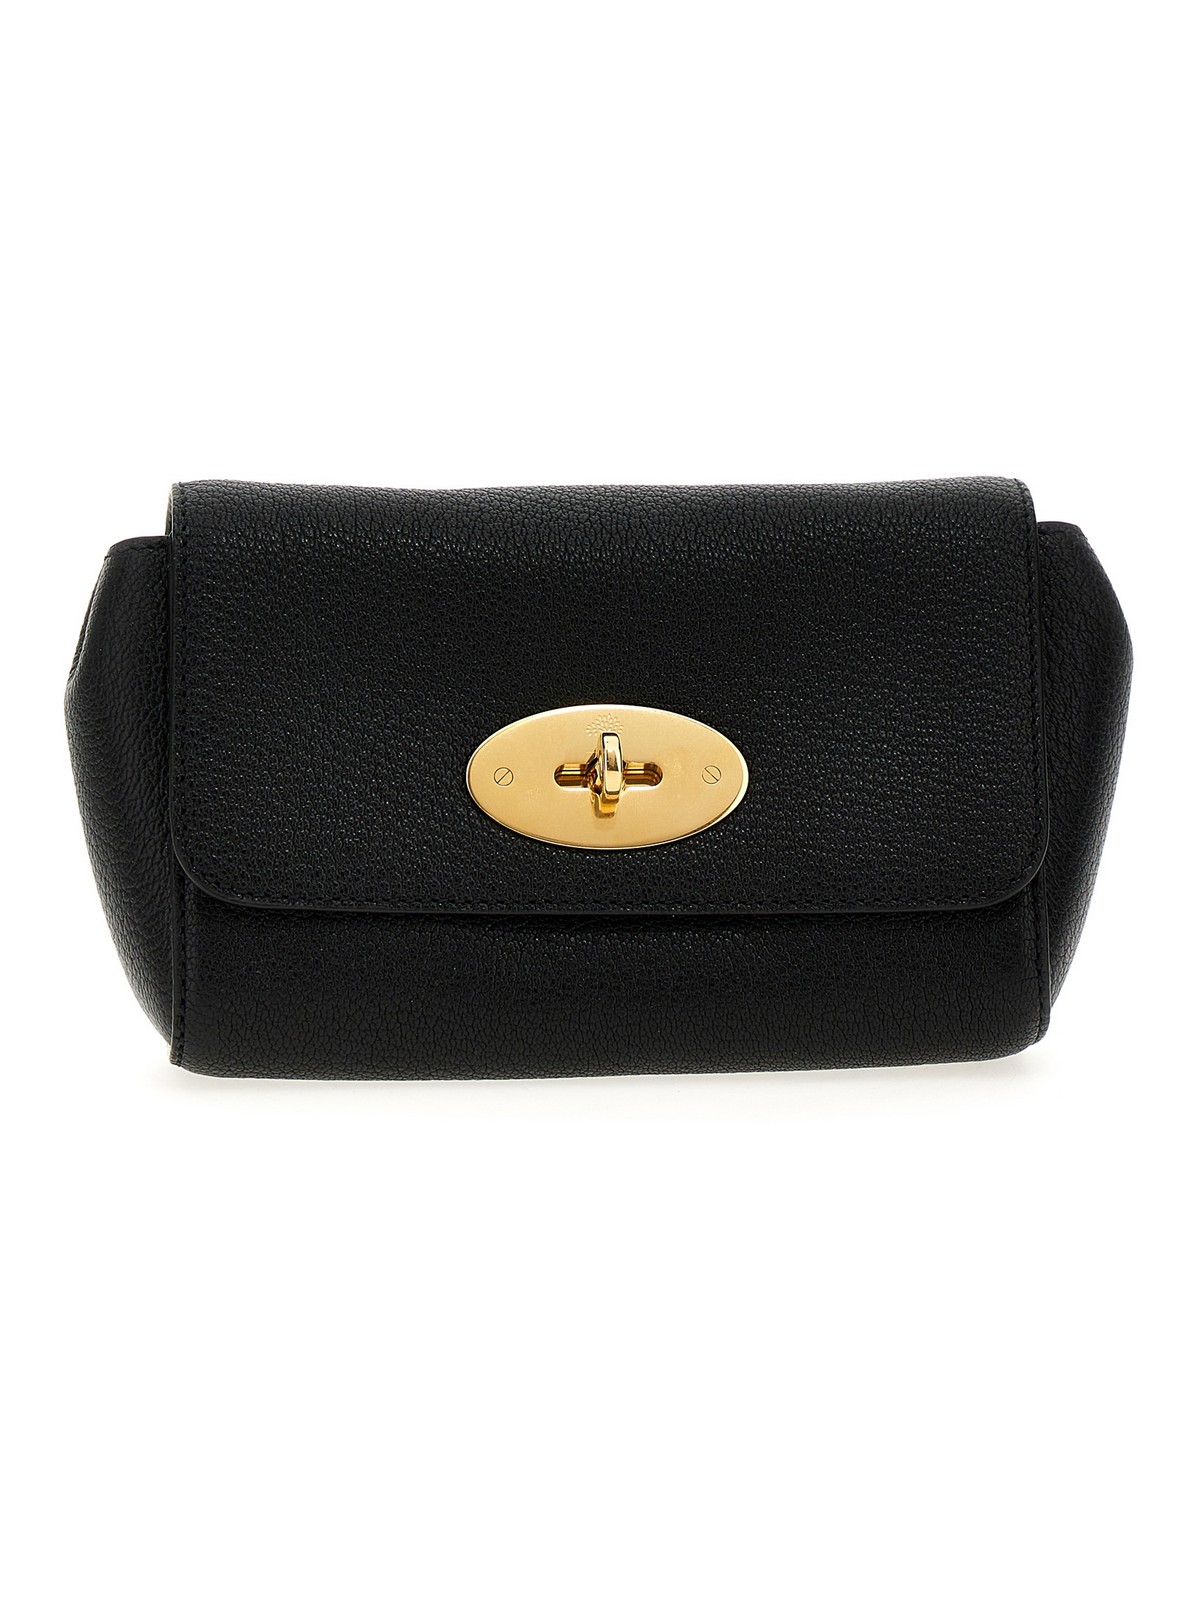 Mulberry Mini Lilly Crossbody Bag In Black